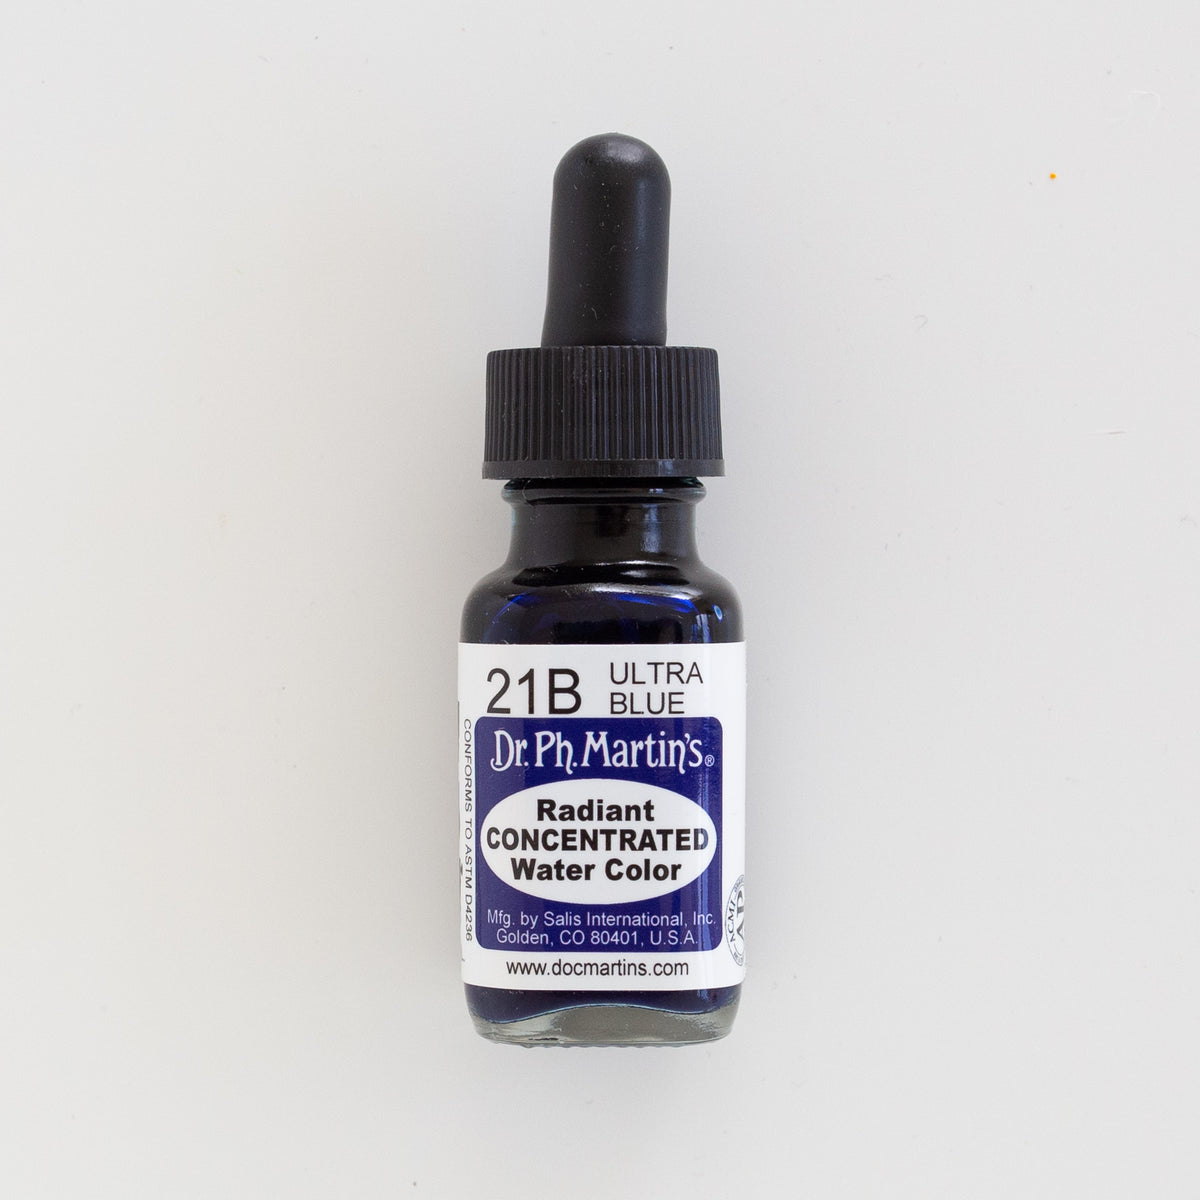 Dr. Ph. Martin’s Radiant Concentrated 21B Ultra Blue